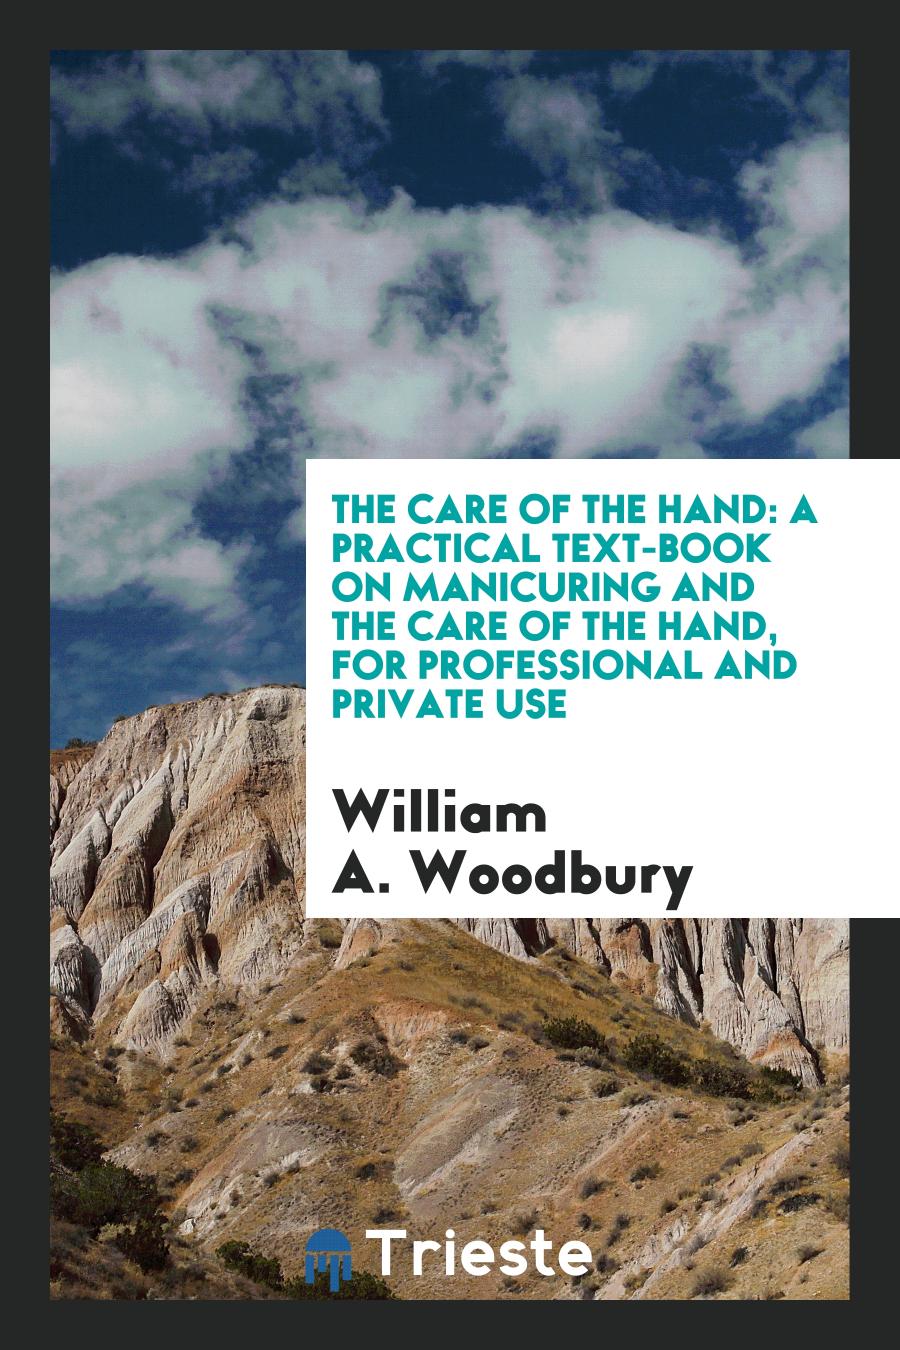 The Care of the Hand: A Practical Text-book on Manicuring and the Care of the Hand, for professional and private use